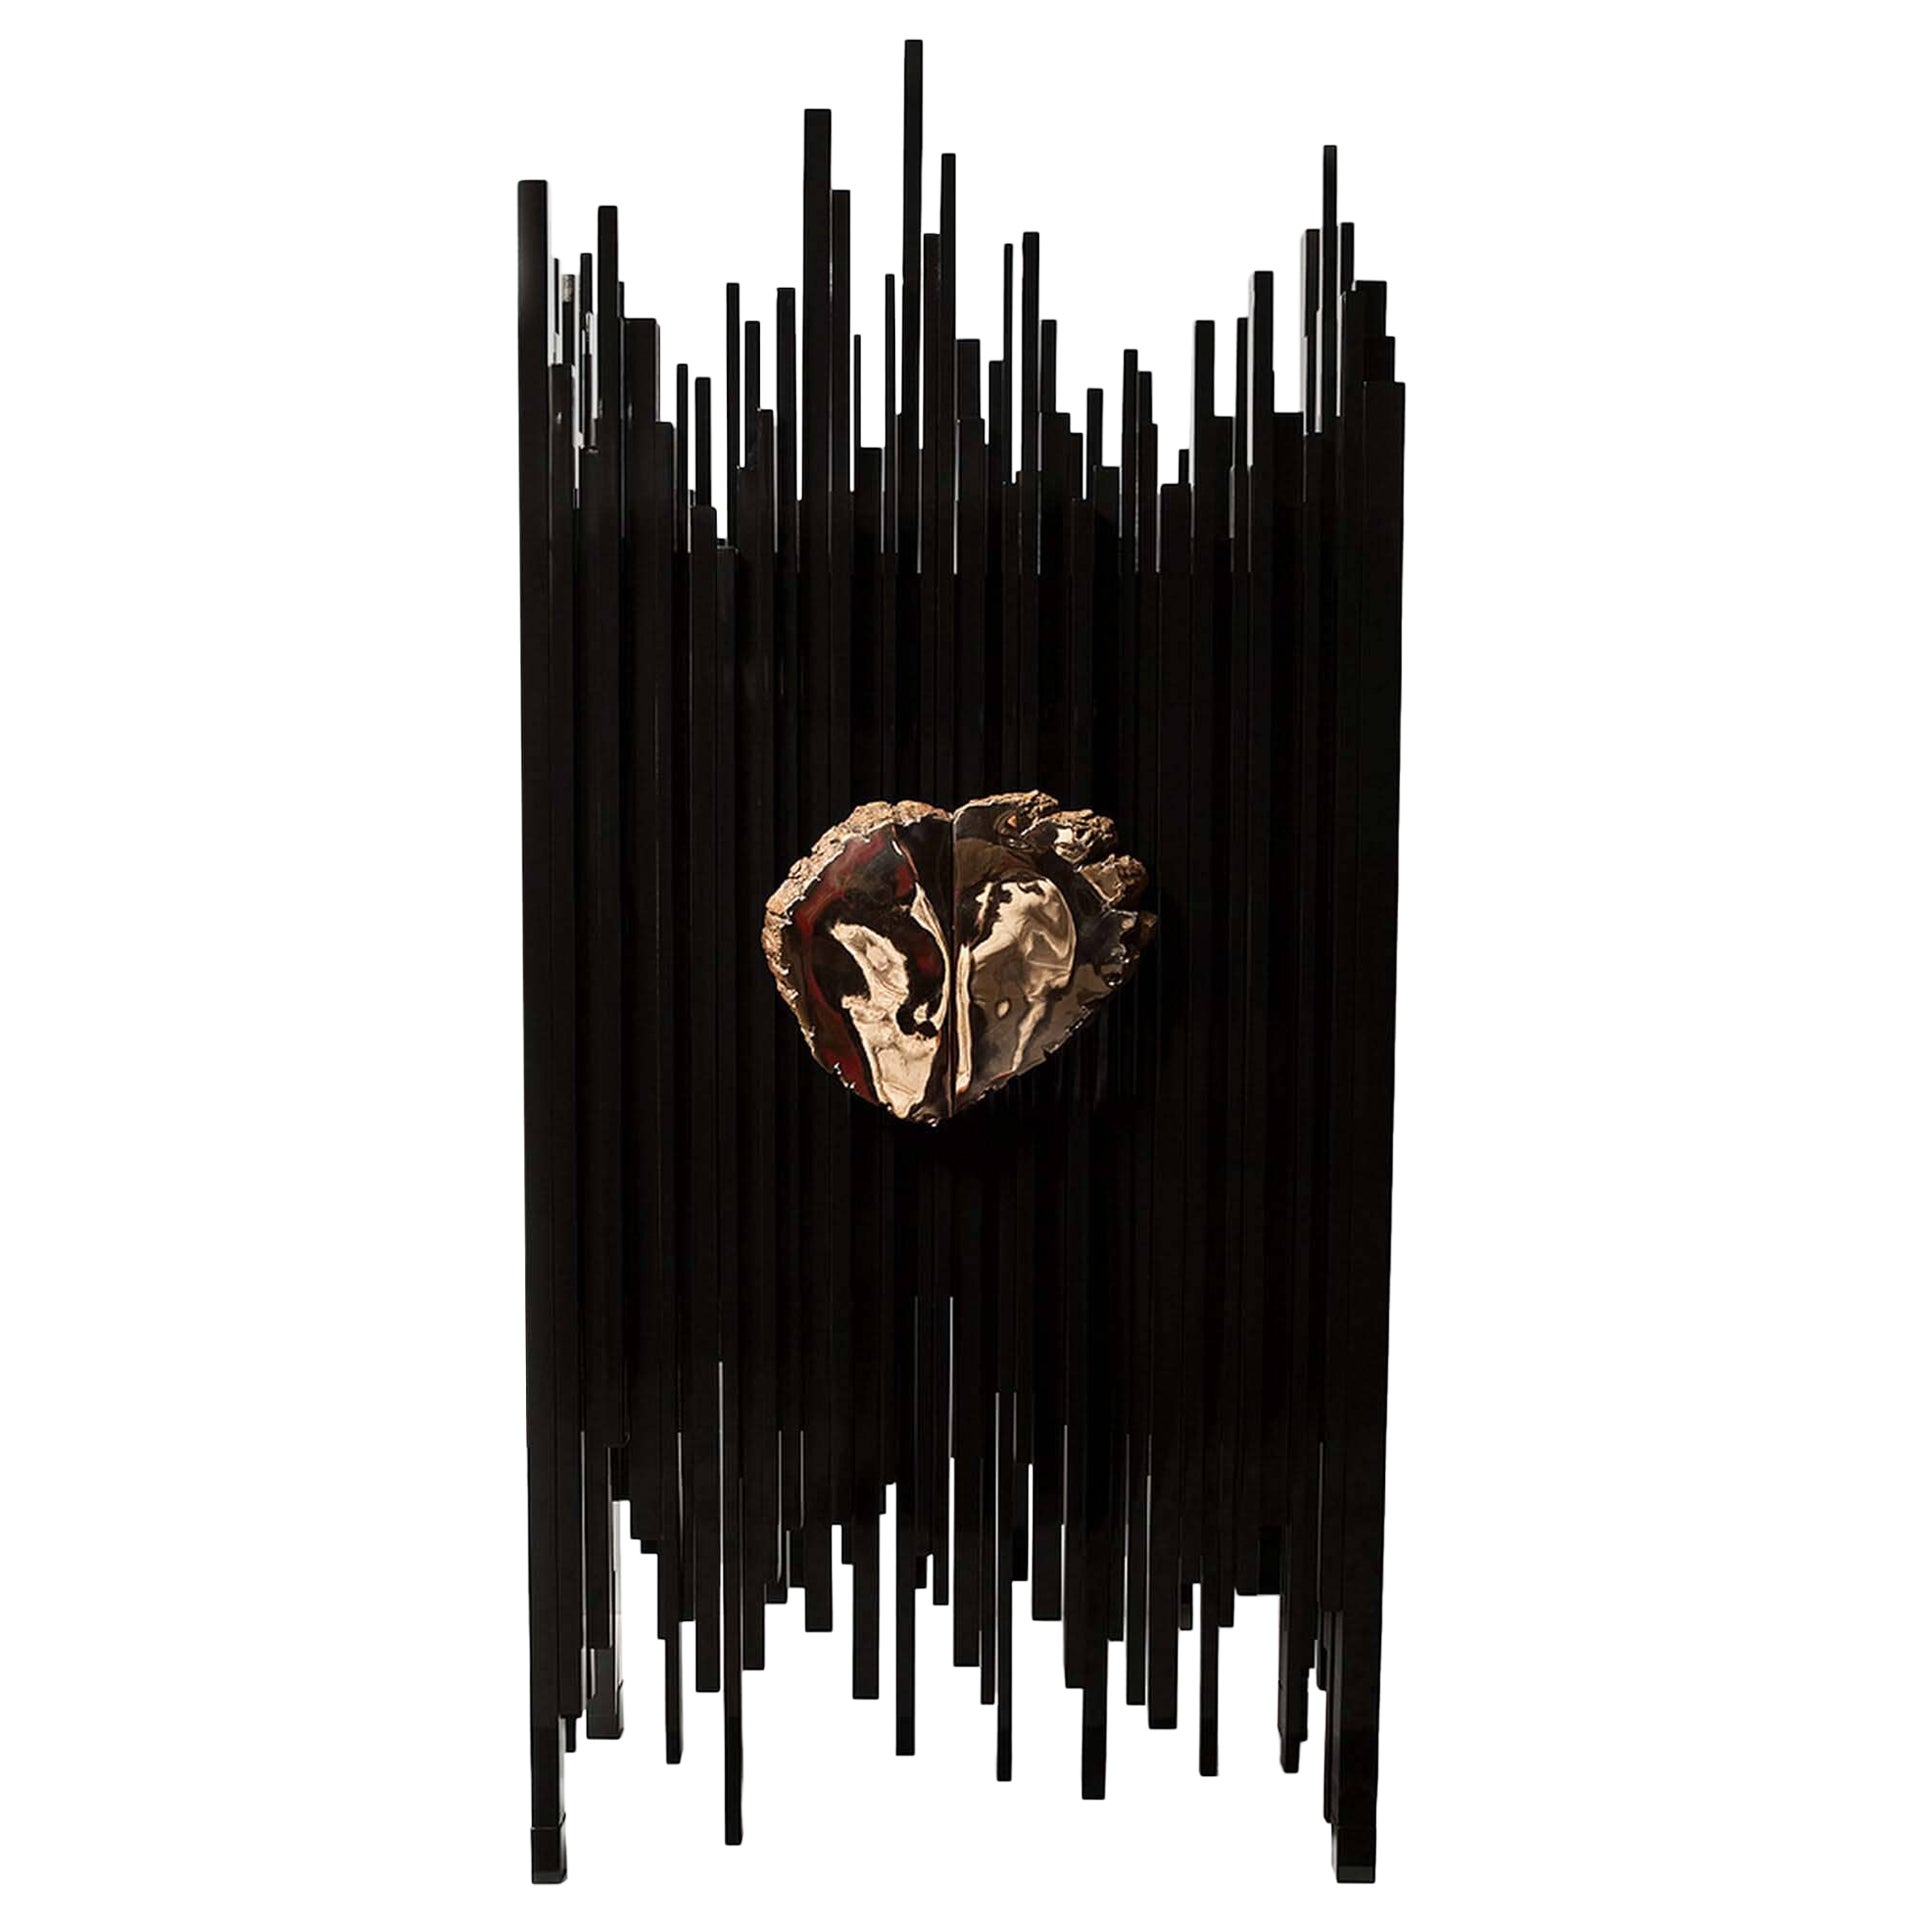 The Black Armoire by Barlas Baylar